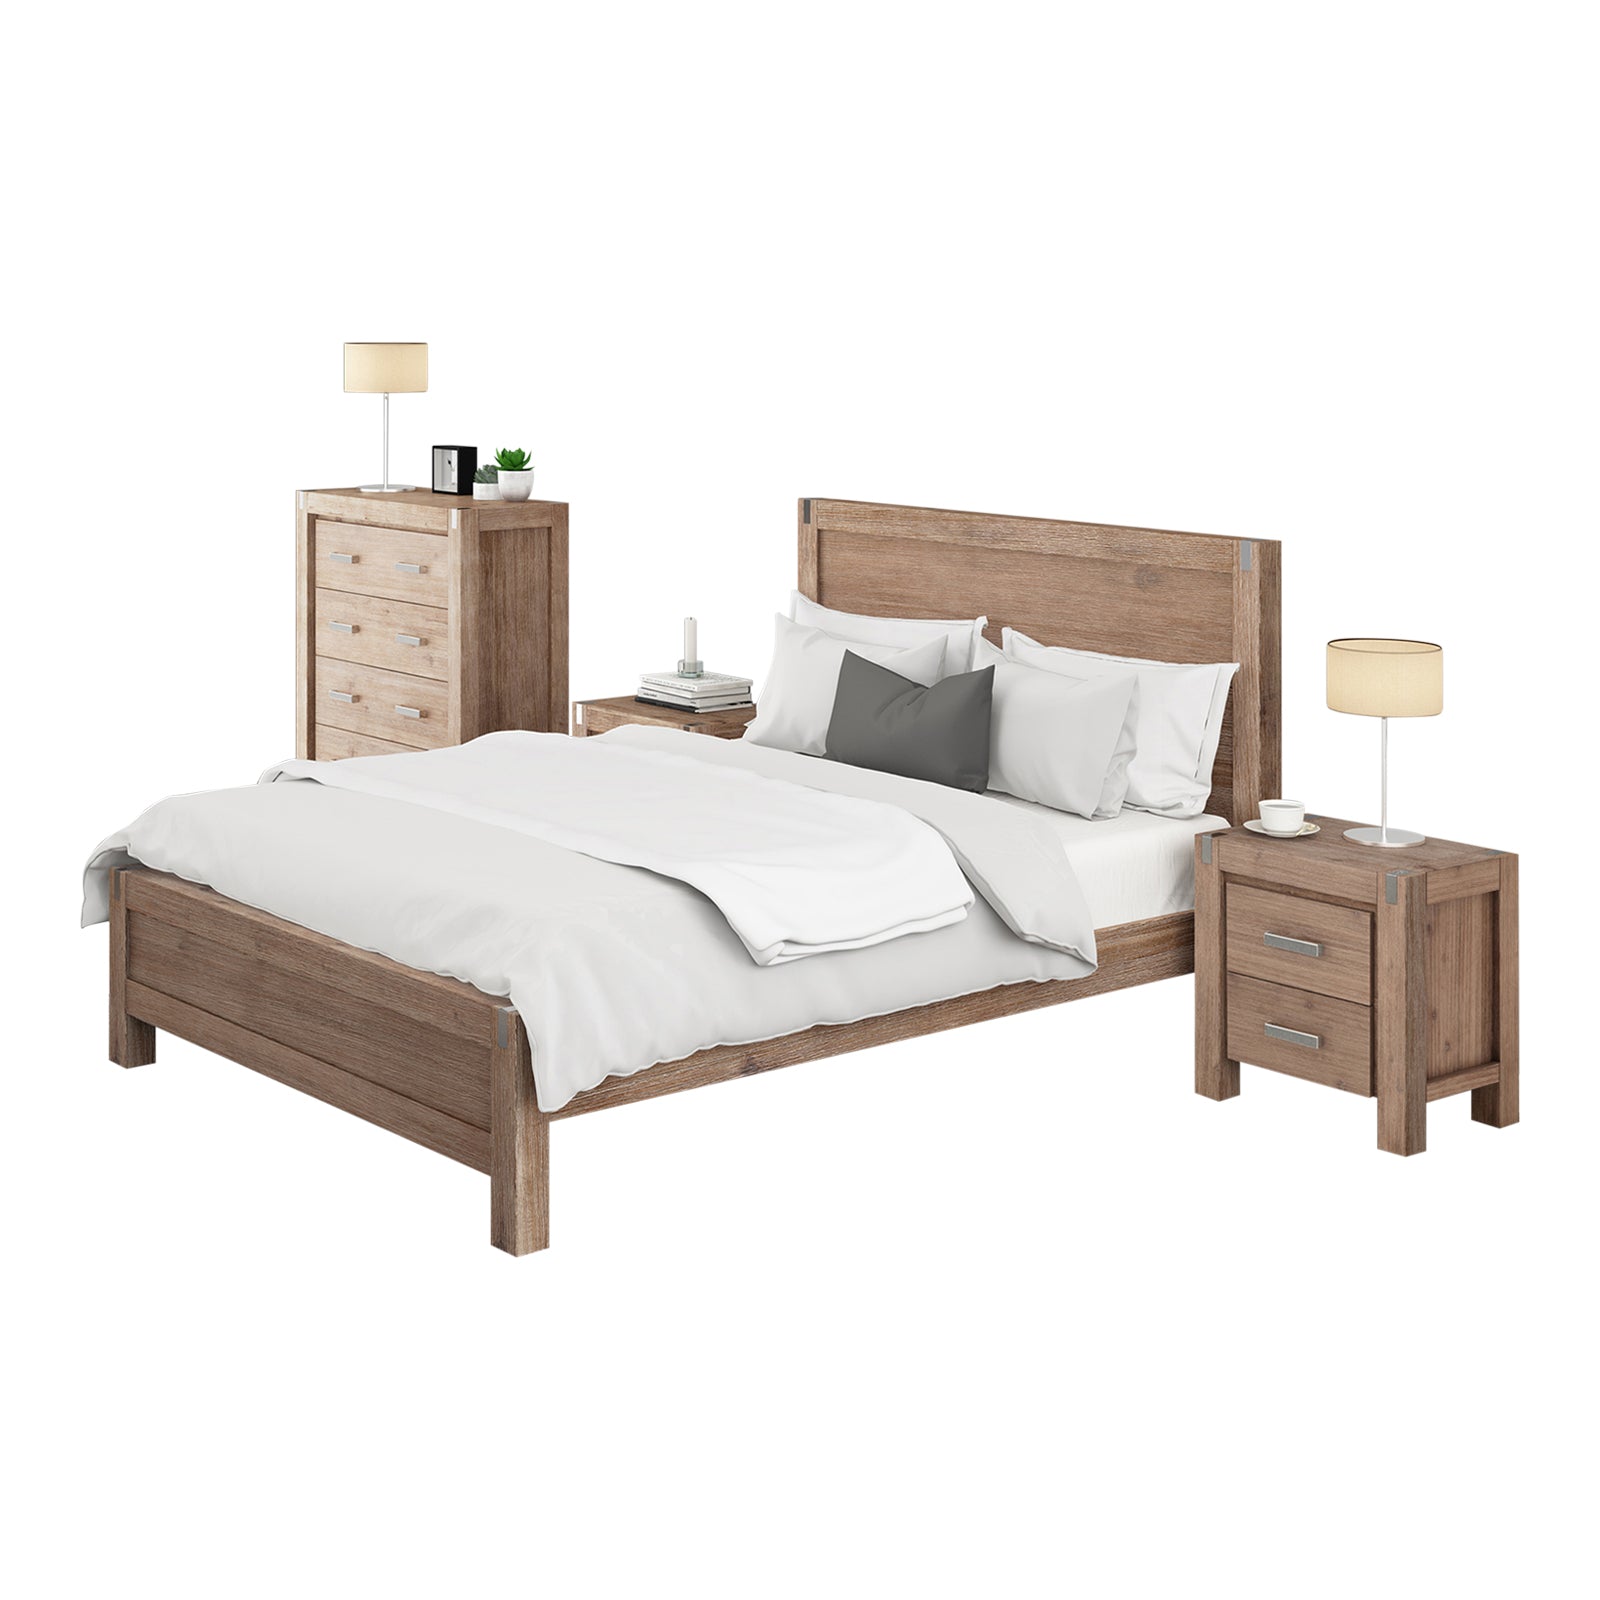 Noor 4 Pieces King Single Size Bedroom Suite Oak Colour with Tallboy